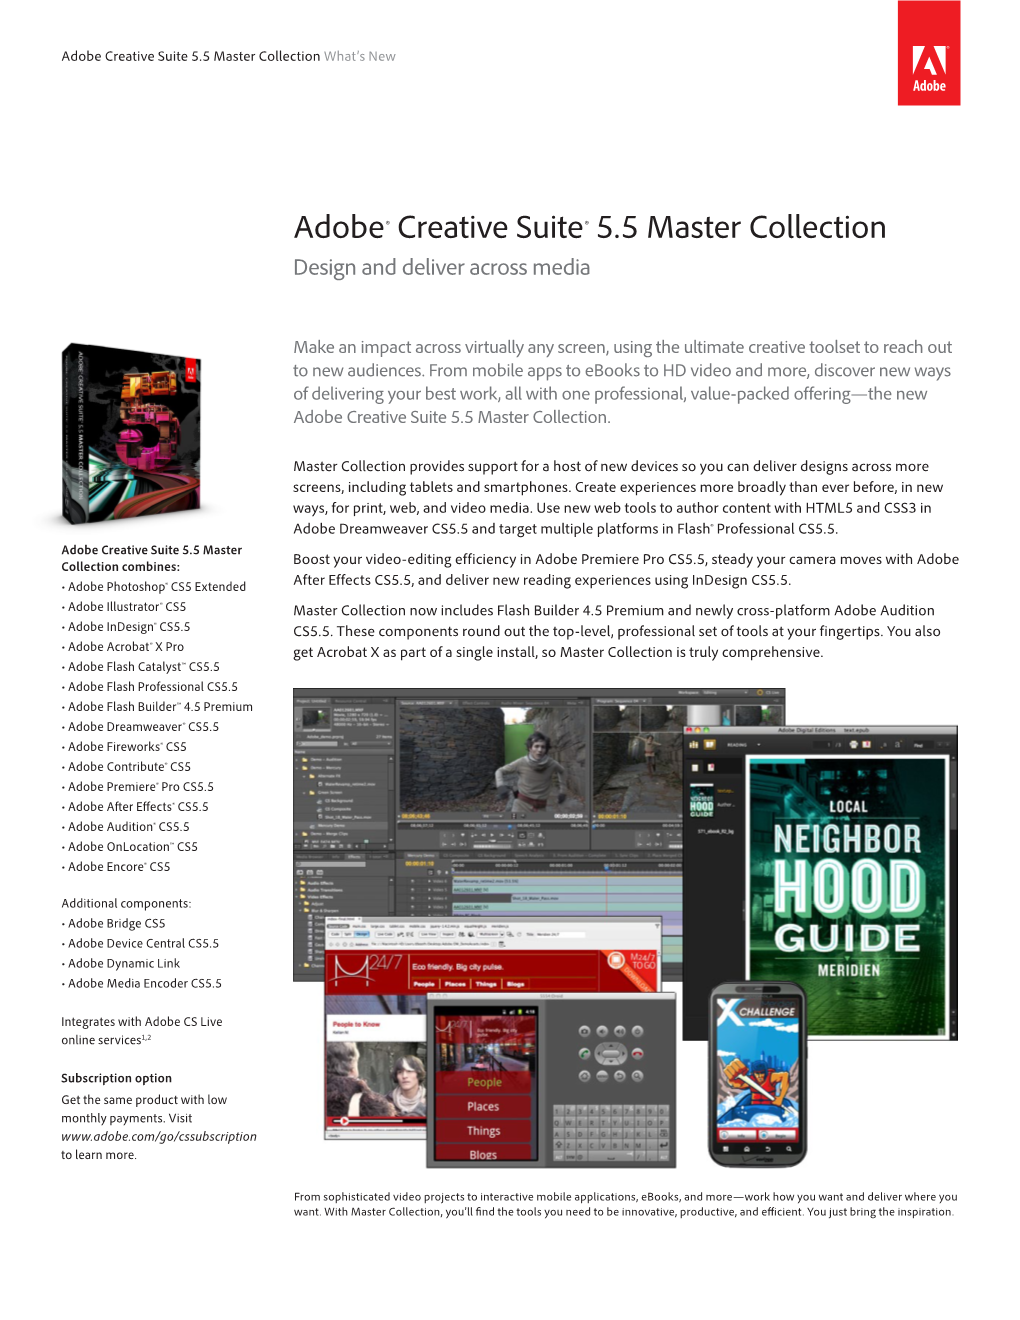 Adobe® Creative Suite® 5.5 Master Collection Professional Audio-For-Video Editing in Adobe Audition CS5.5 4 Design and Deliver Across Media